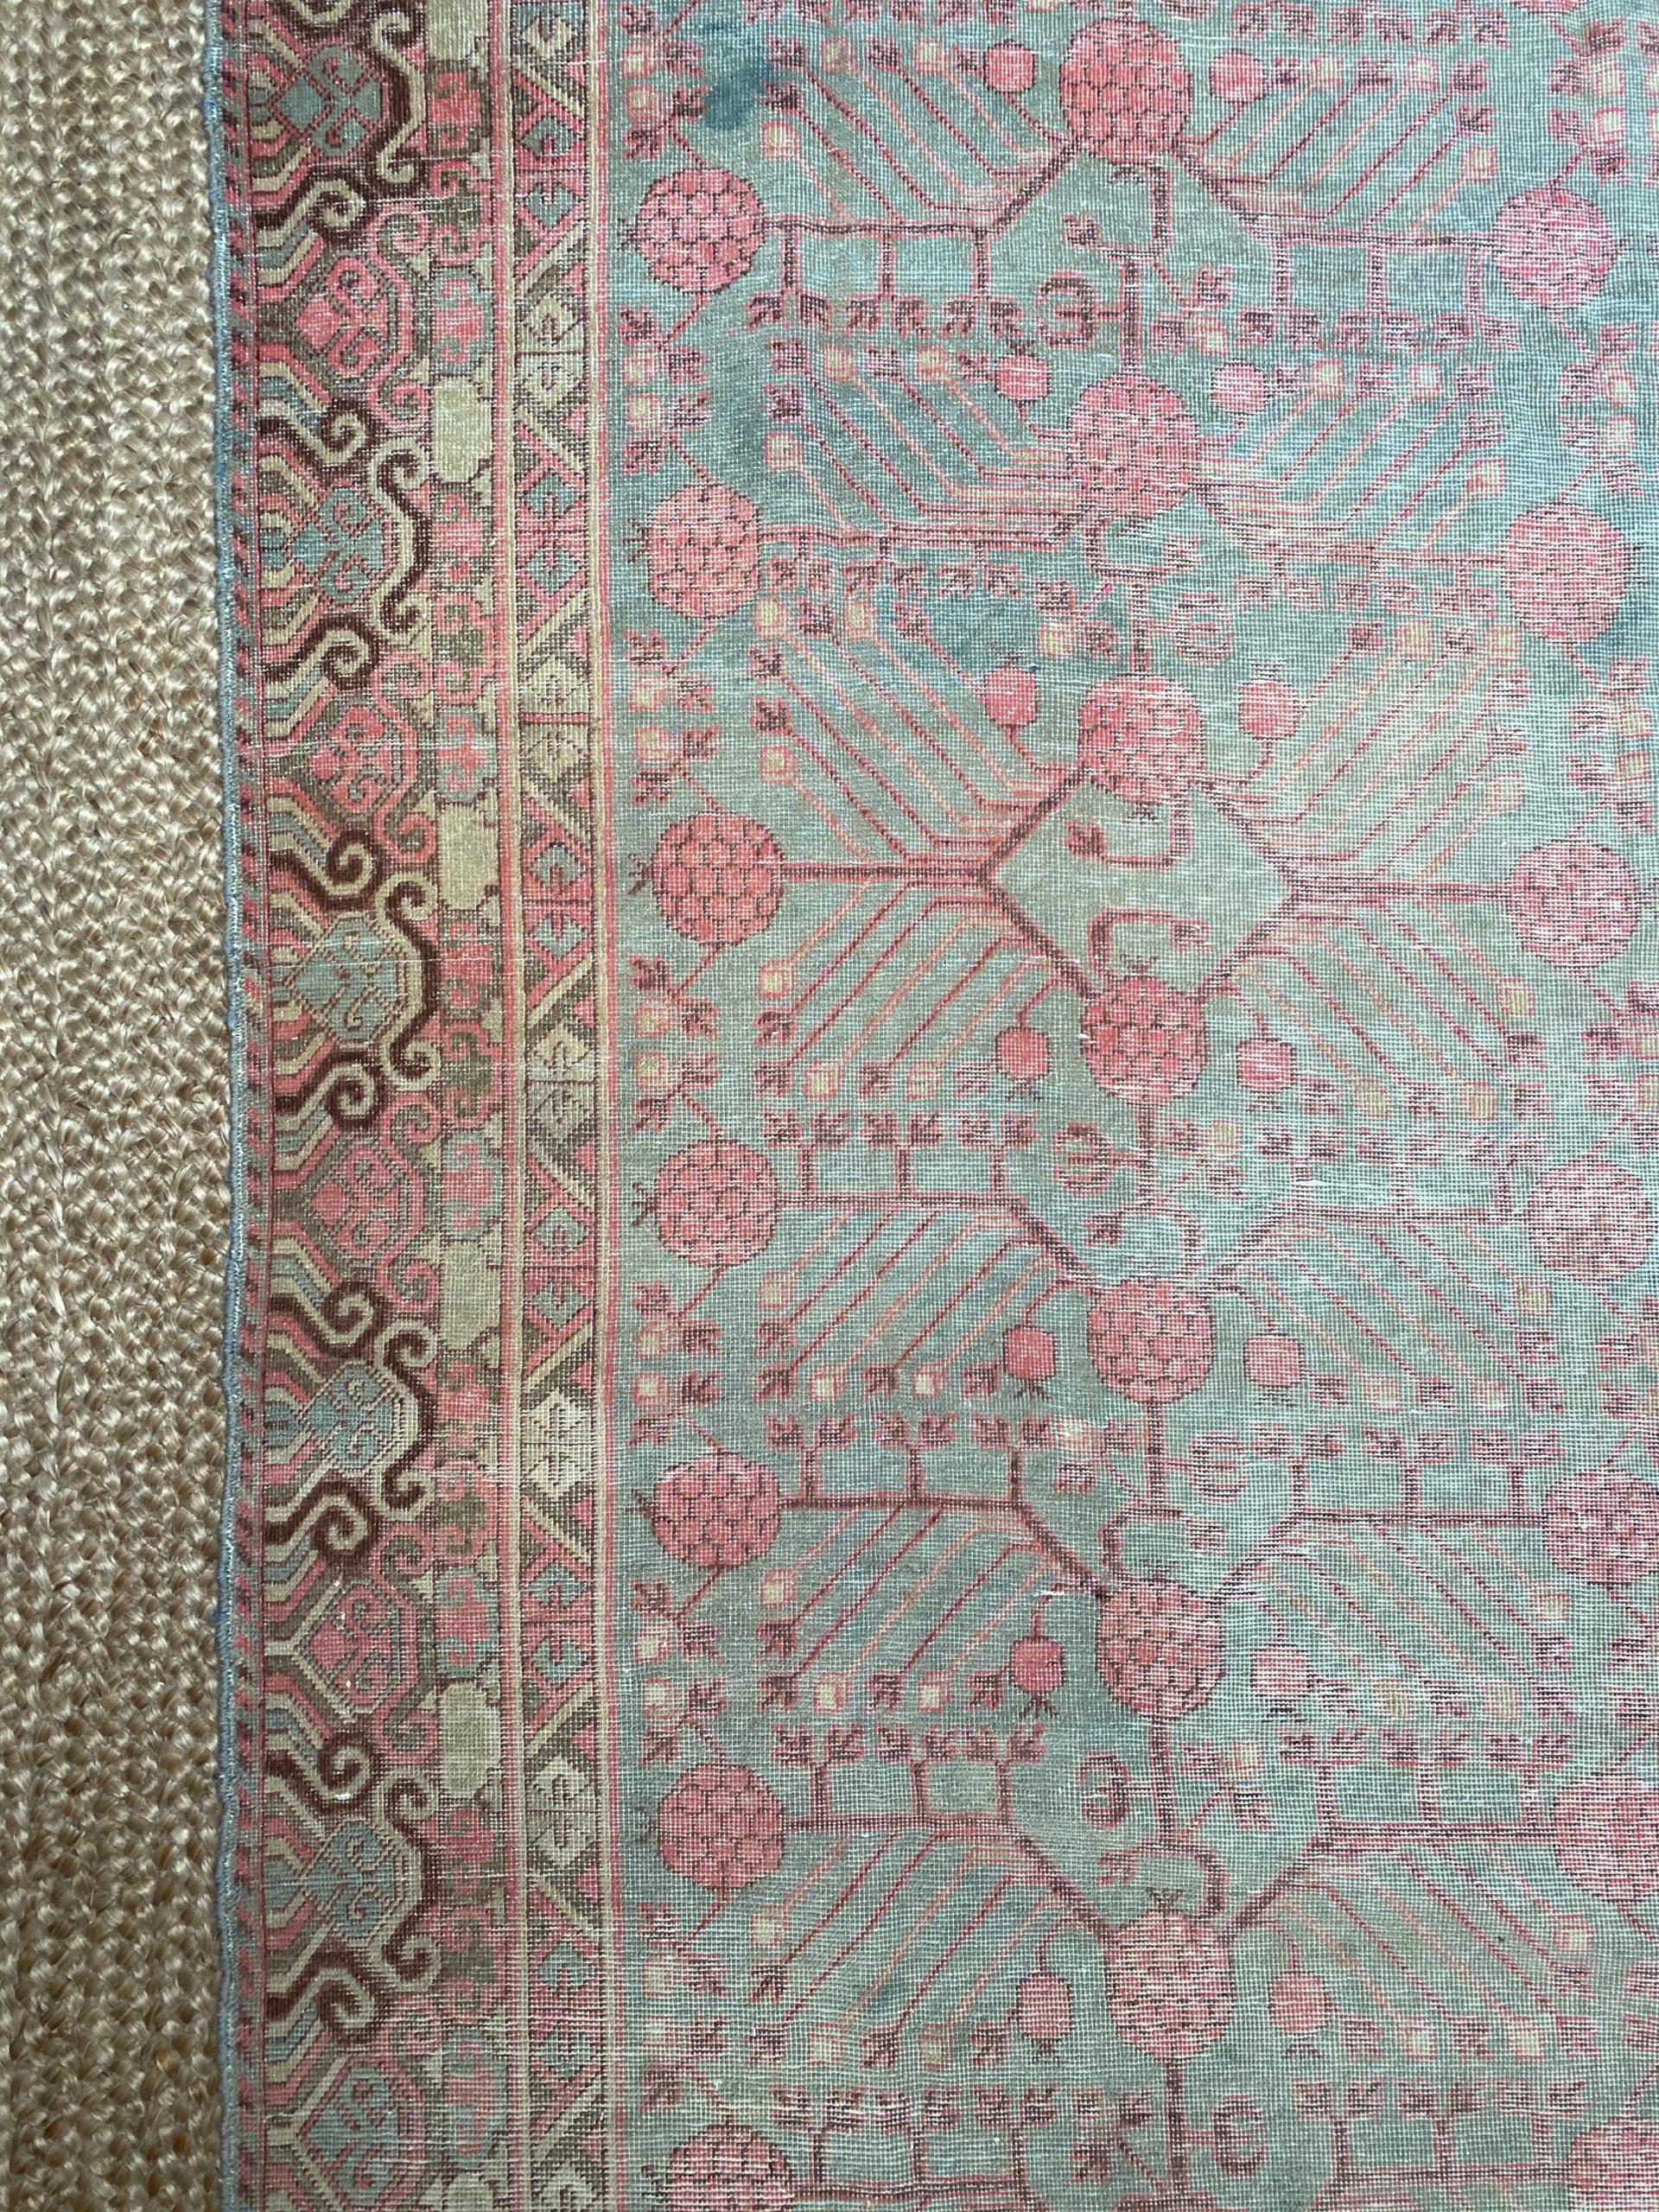 Orgin: Mongolia
Dimensions: 14’4? x 7’4?
Age: 1950’s
Design: Khotan
Material: 100% Wool-pile
Color: Sky Blue, Pink, Beige, Brown

6089

An epitome of history, character and culture, Antique Khotan rugs add richness to a room. Produced in